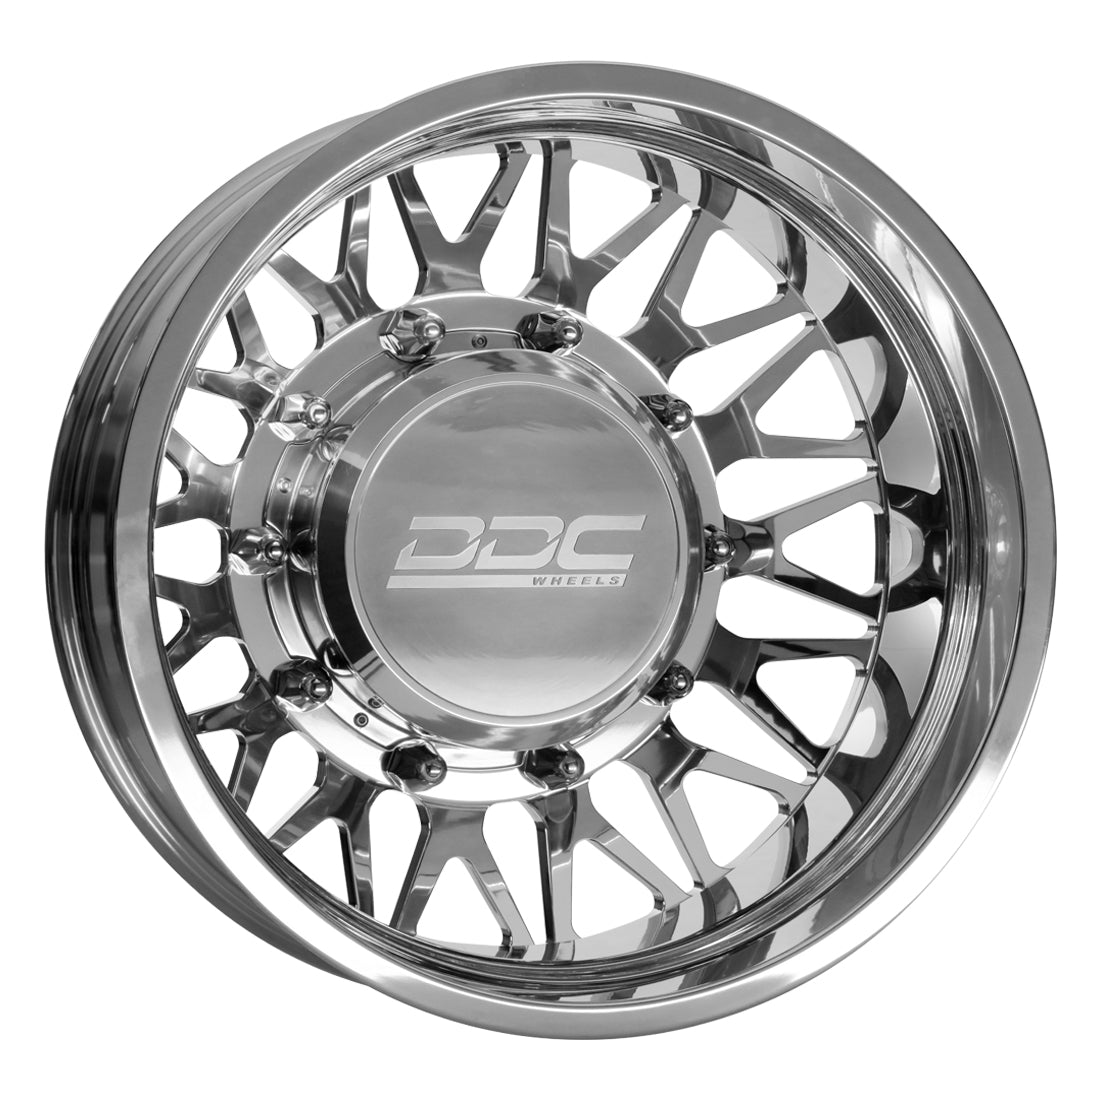 The Mesh Polished Open Country R/T 275/65R20 (34.1 x 11)